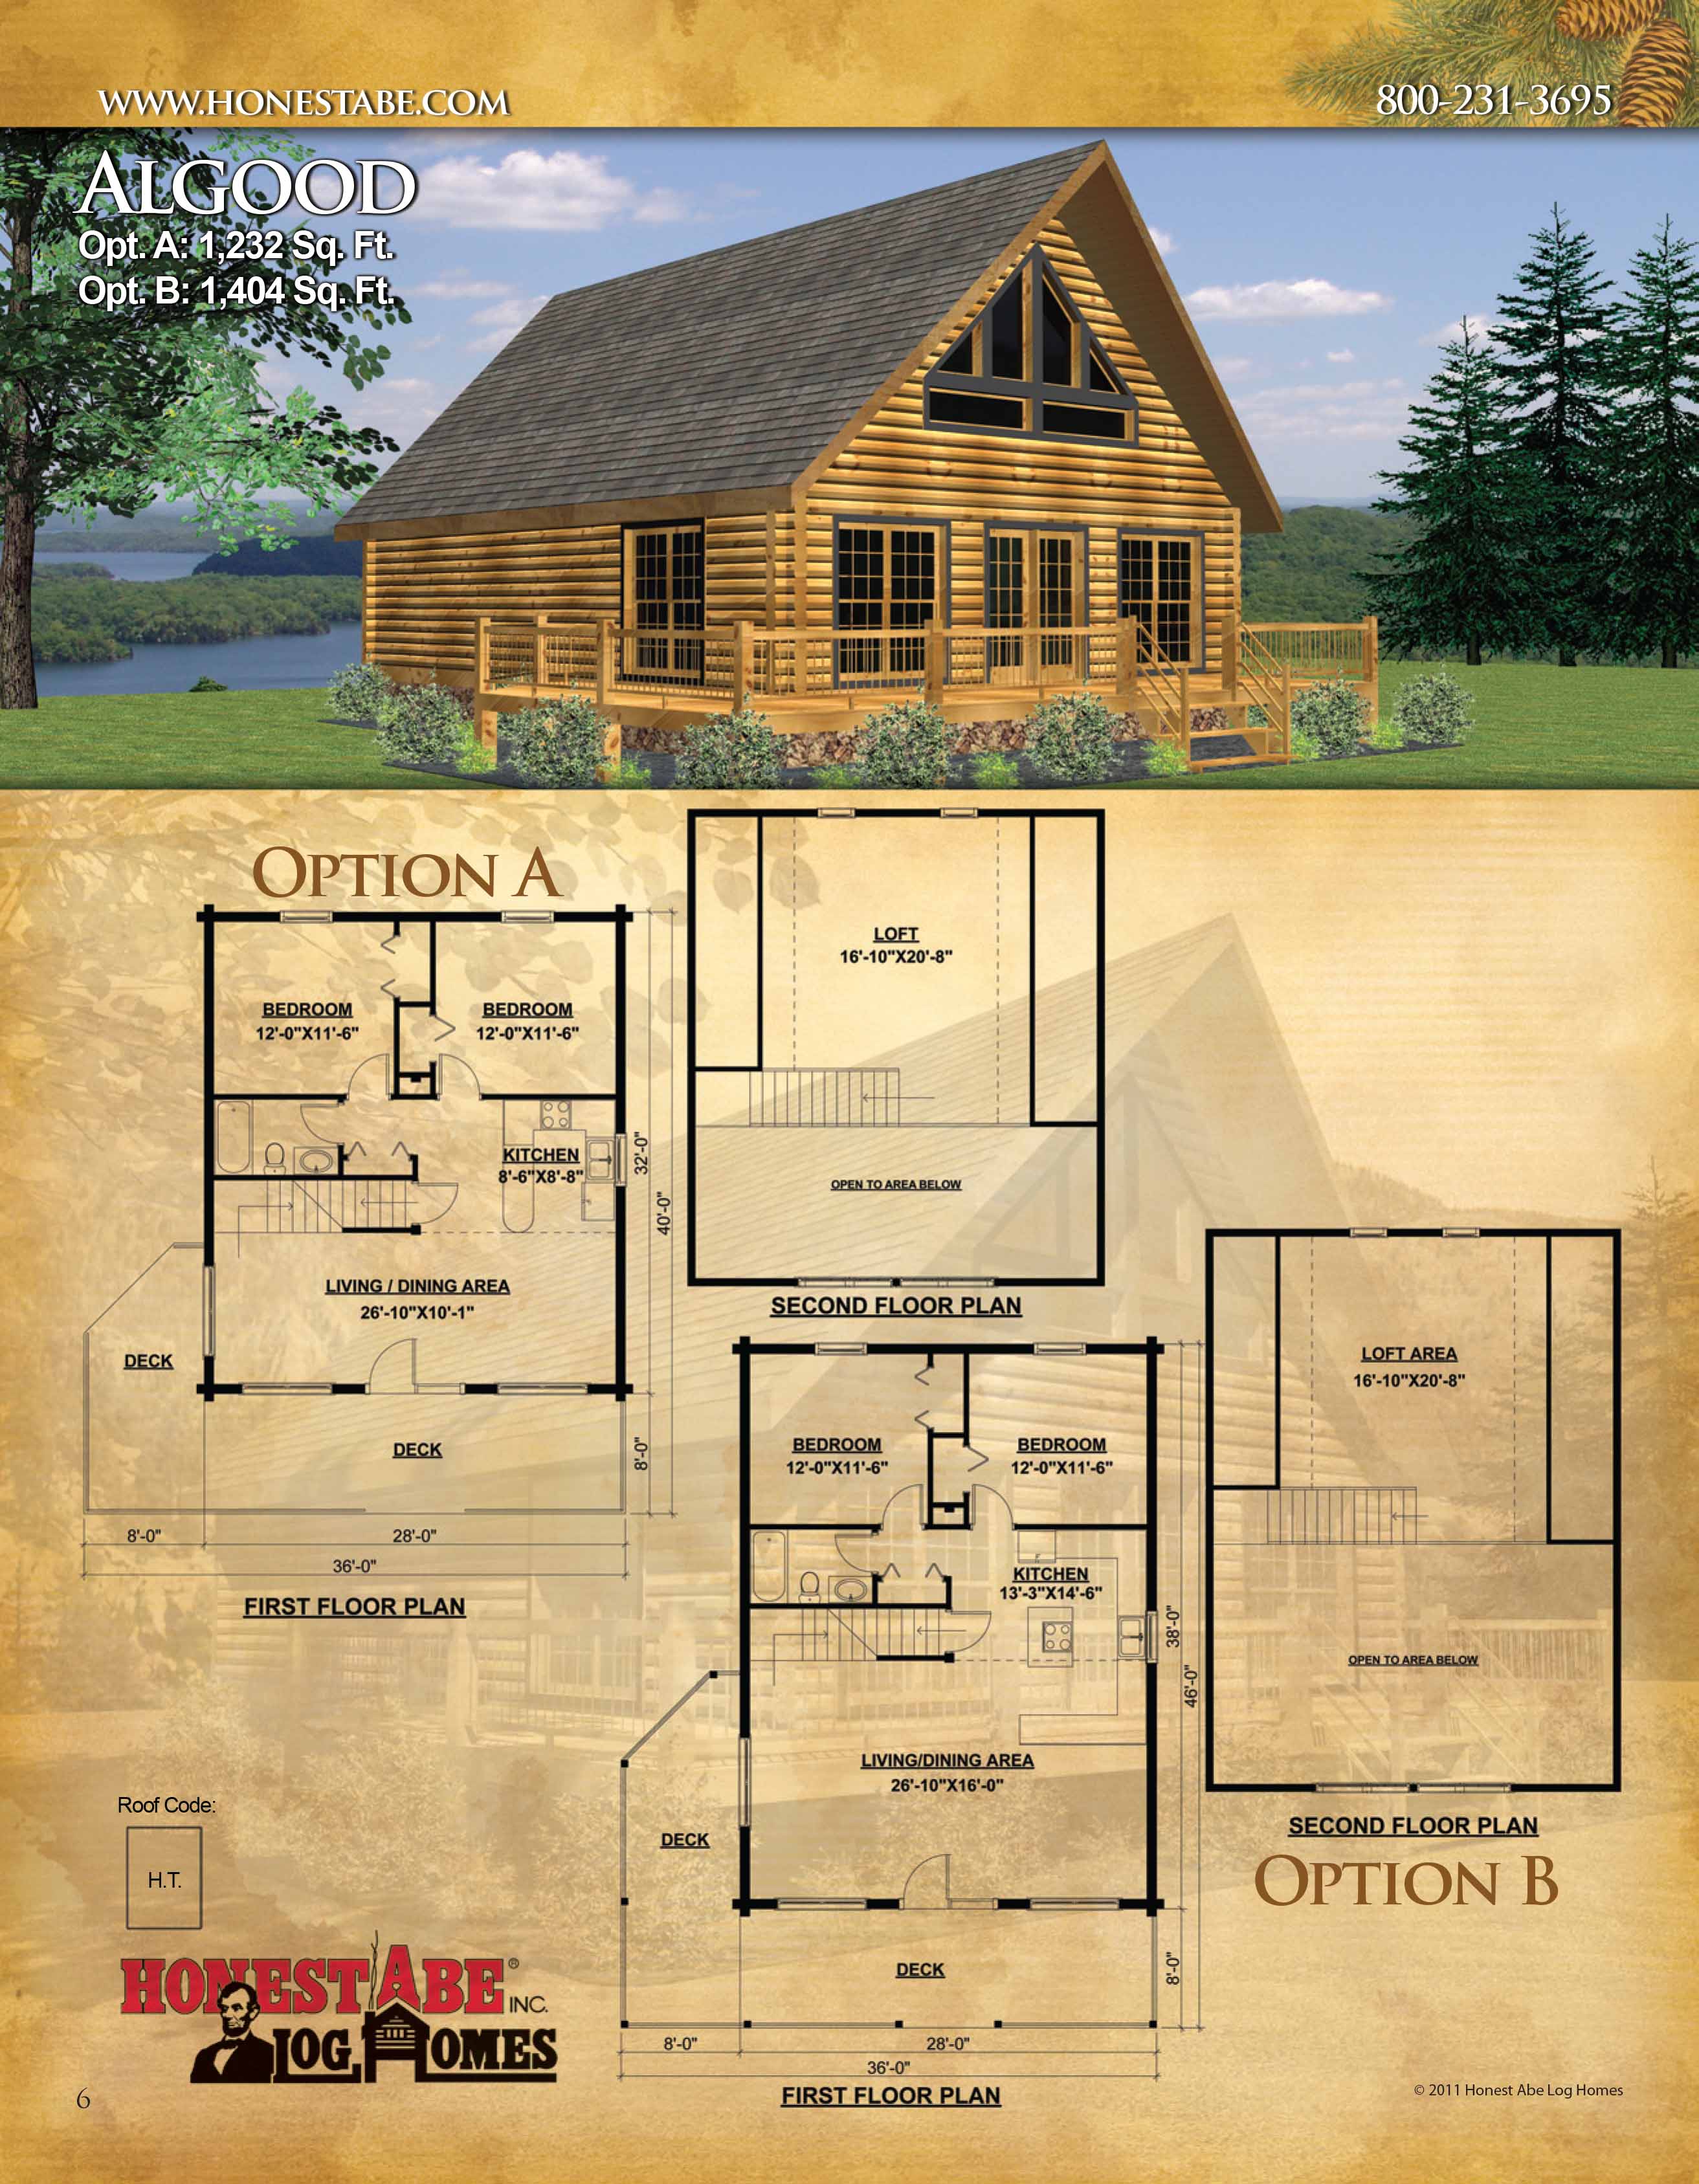 Browse Floor Plans for Our Custom Log Cabin Homes